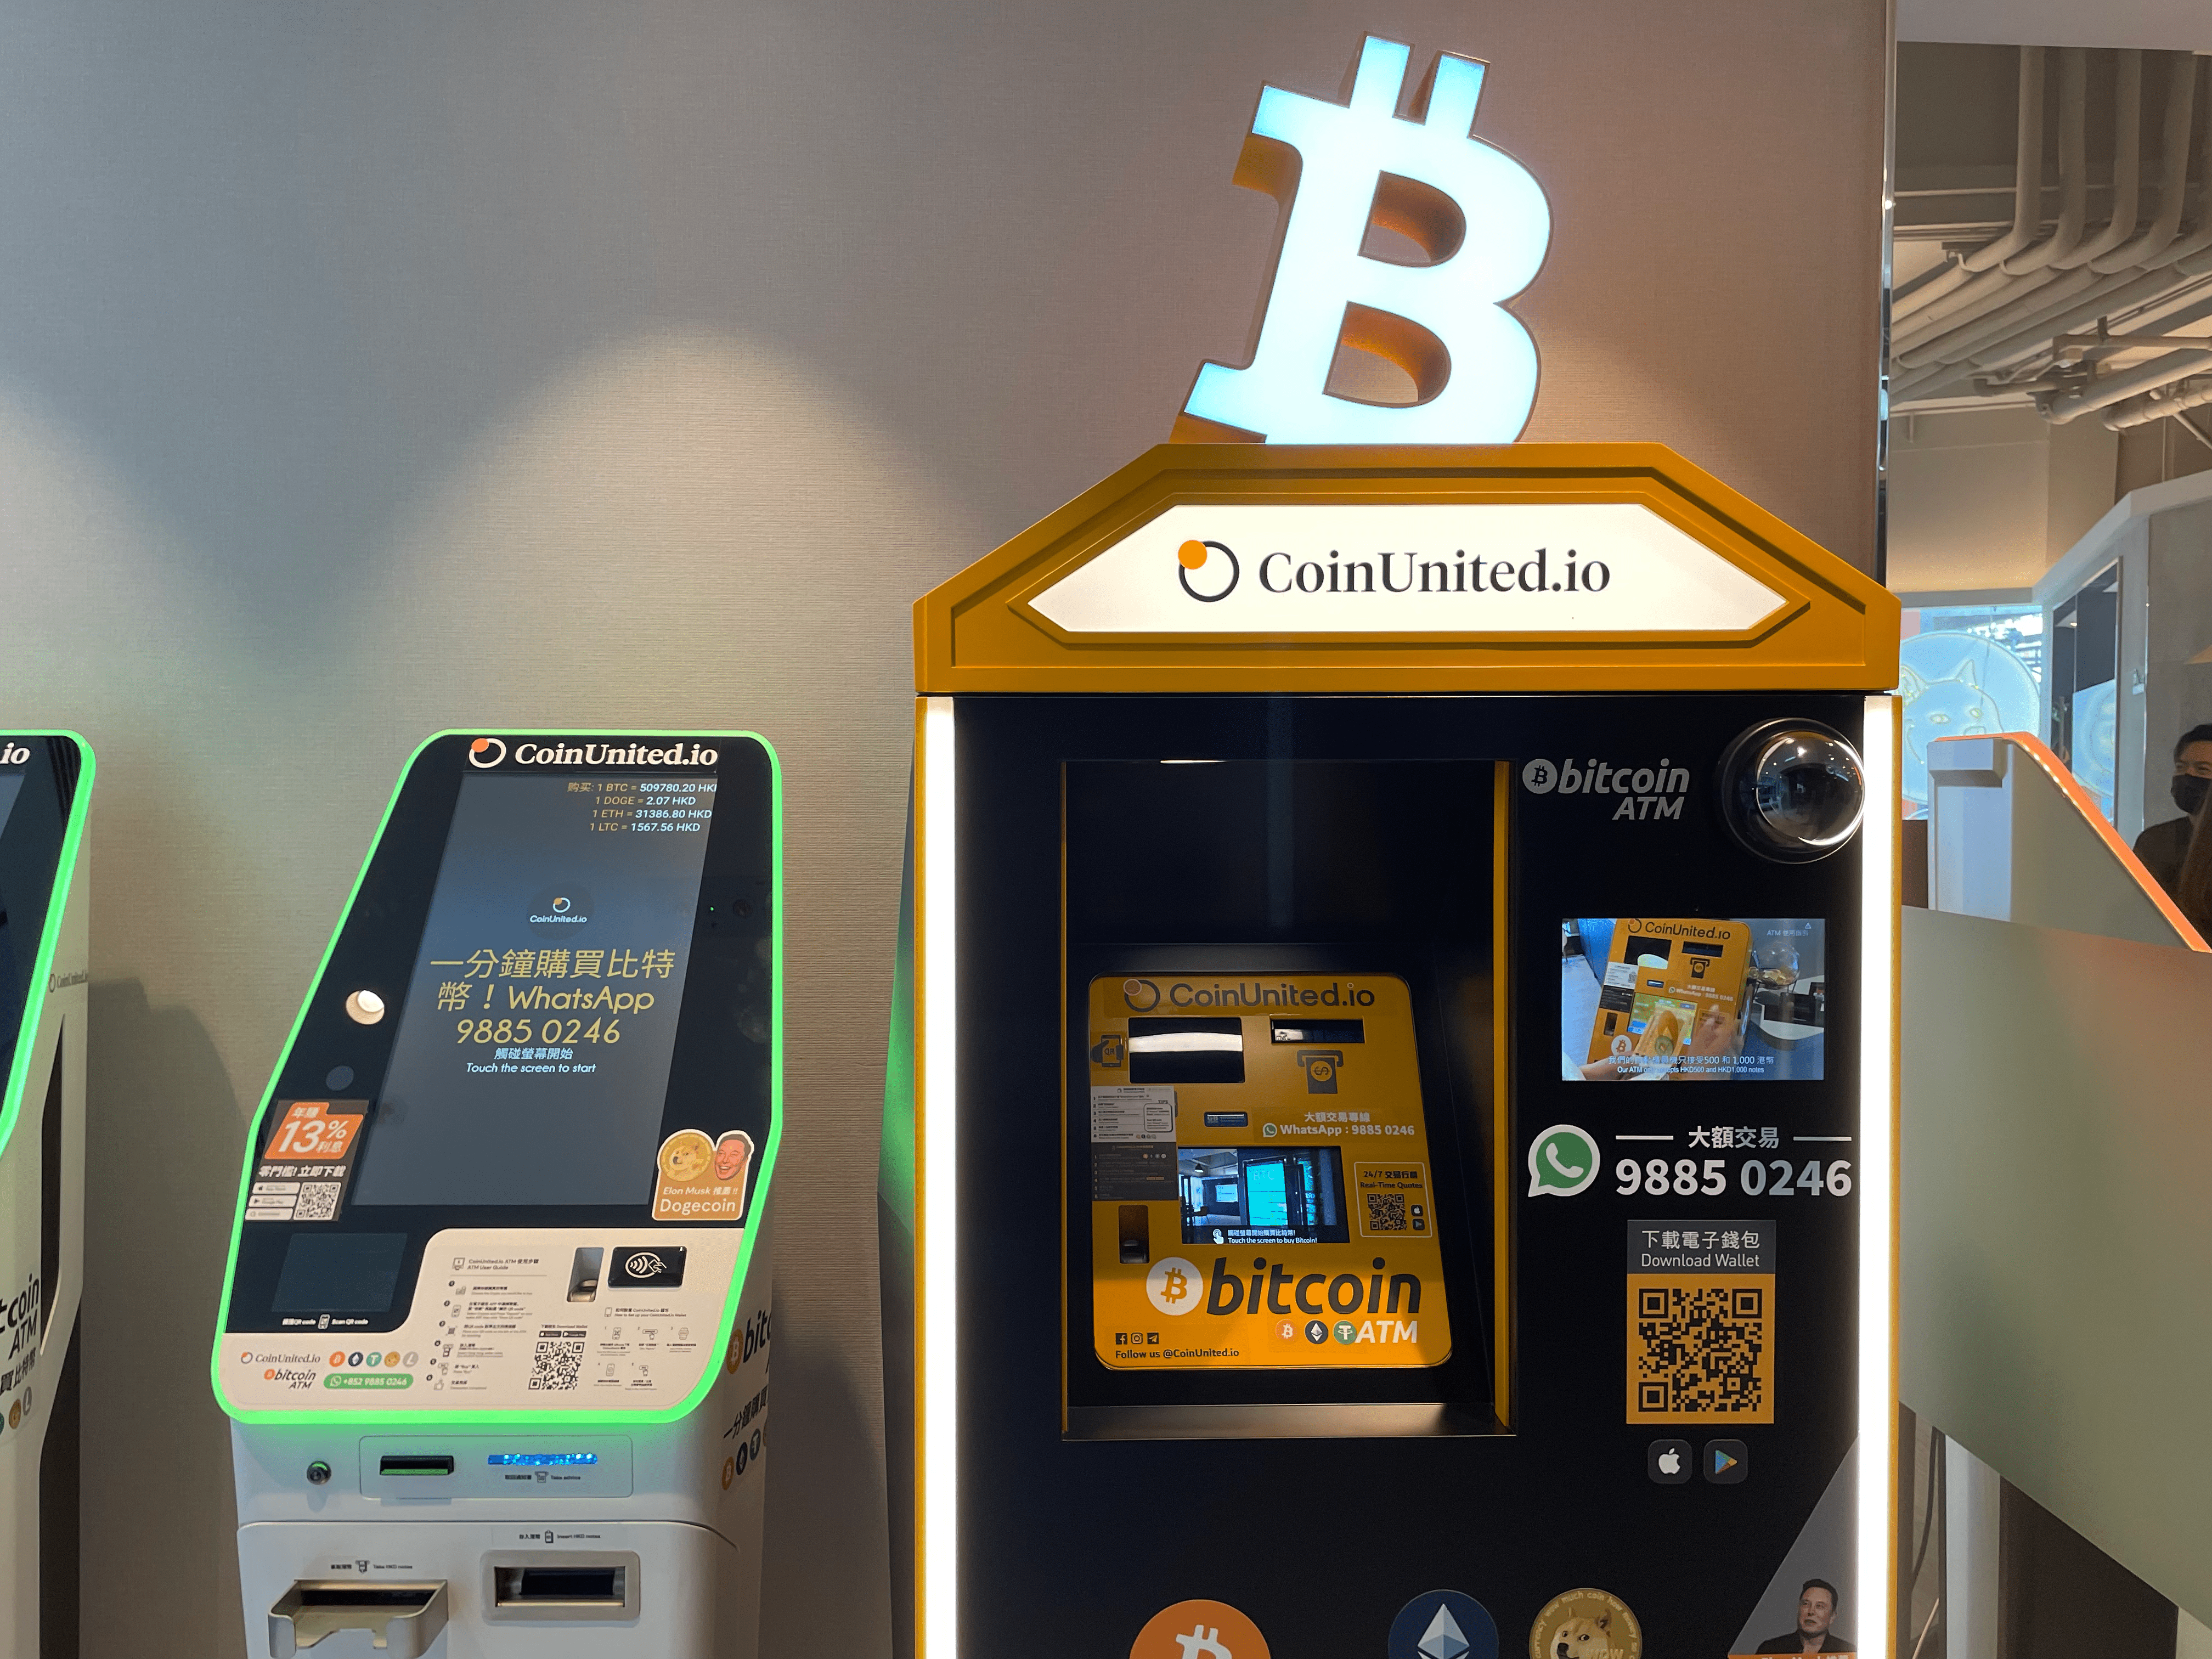 Guide on Bitcoin ATM business - how to start crypto ATM business